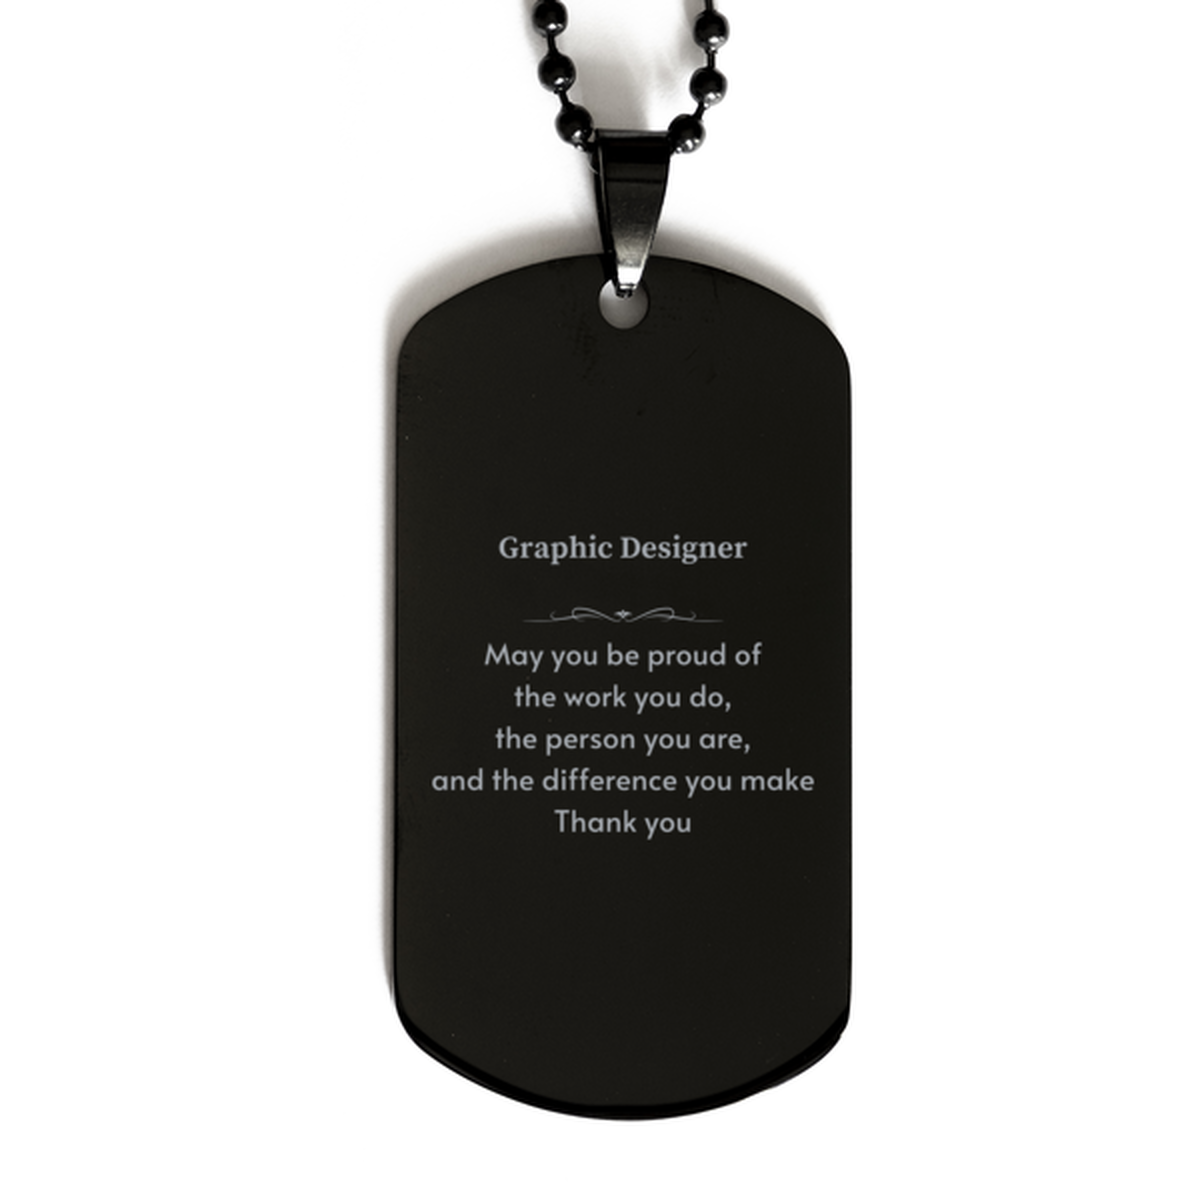 Heartwarming Black Dog Tag Retirement Coworkers Gifts for Graphic Designer, Graphic Designer May You be proud of the work you do, the person you are Gifts for Boss Men Women Friends